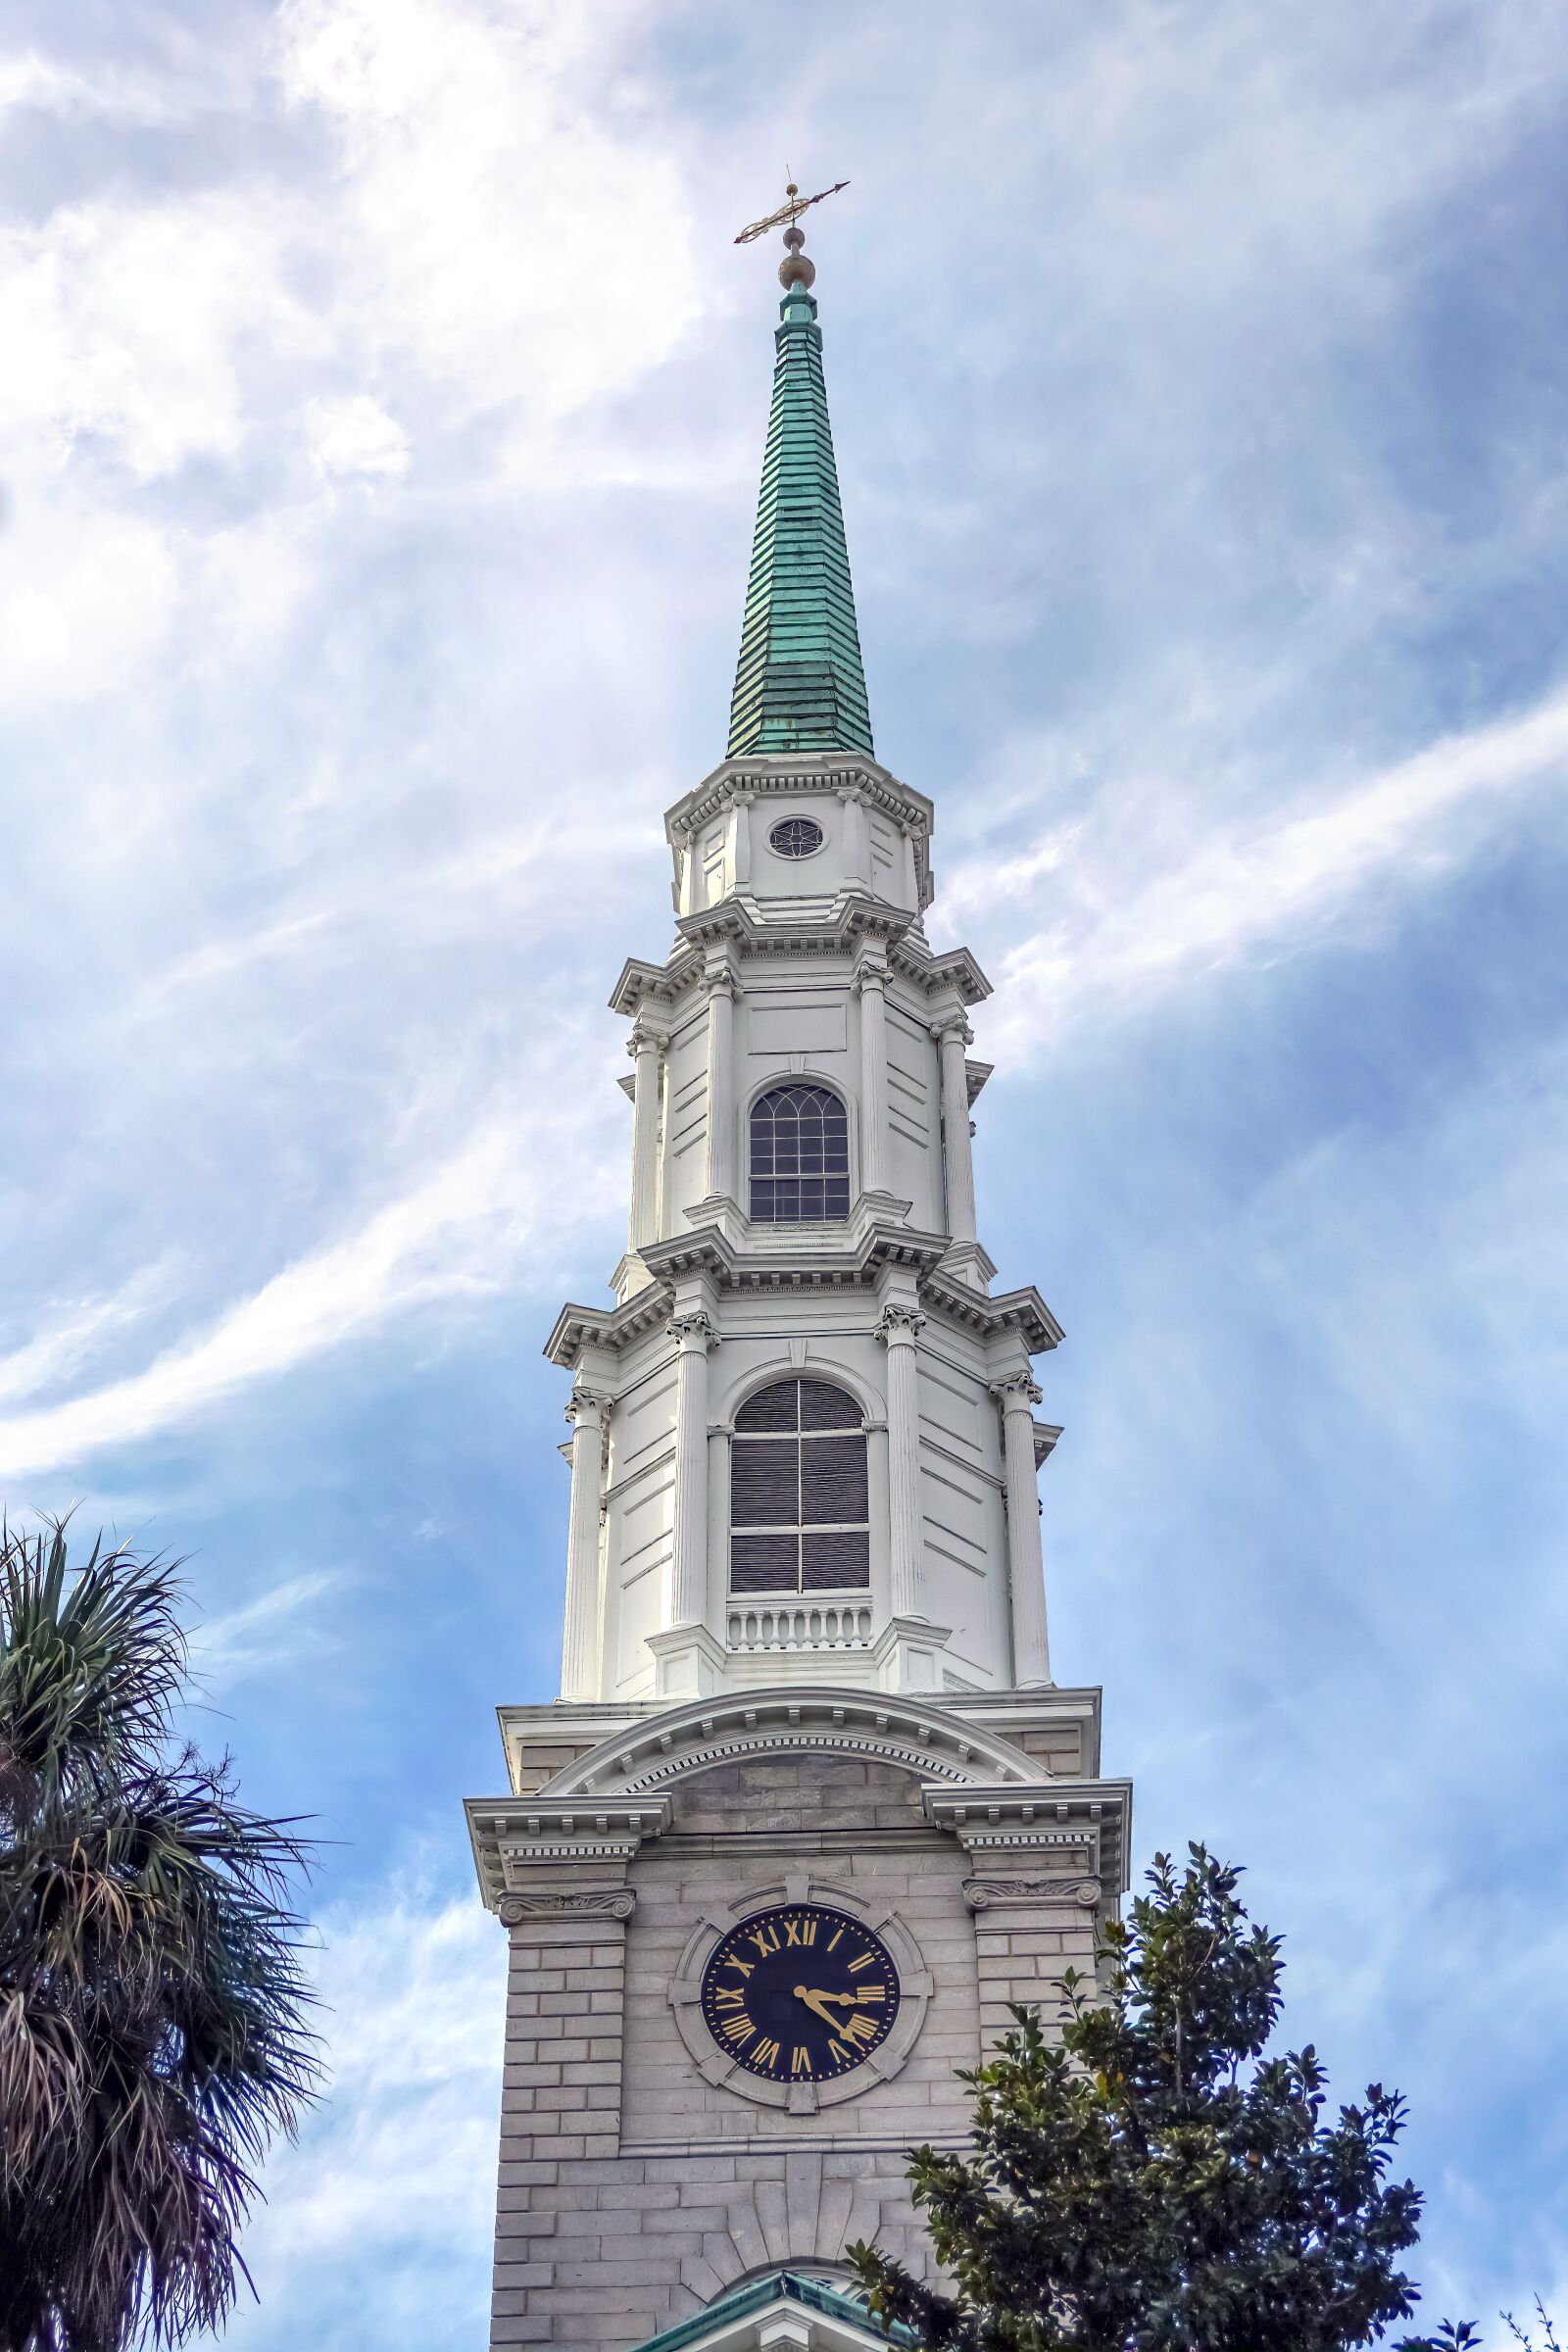 Sony a6300 + Sony E 16-50mm F3.5-5.6 PZ OSS sample photo. Church, steeple, architecture photography